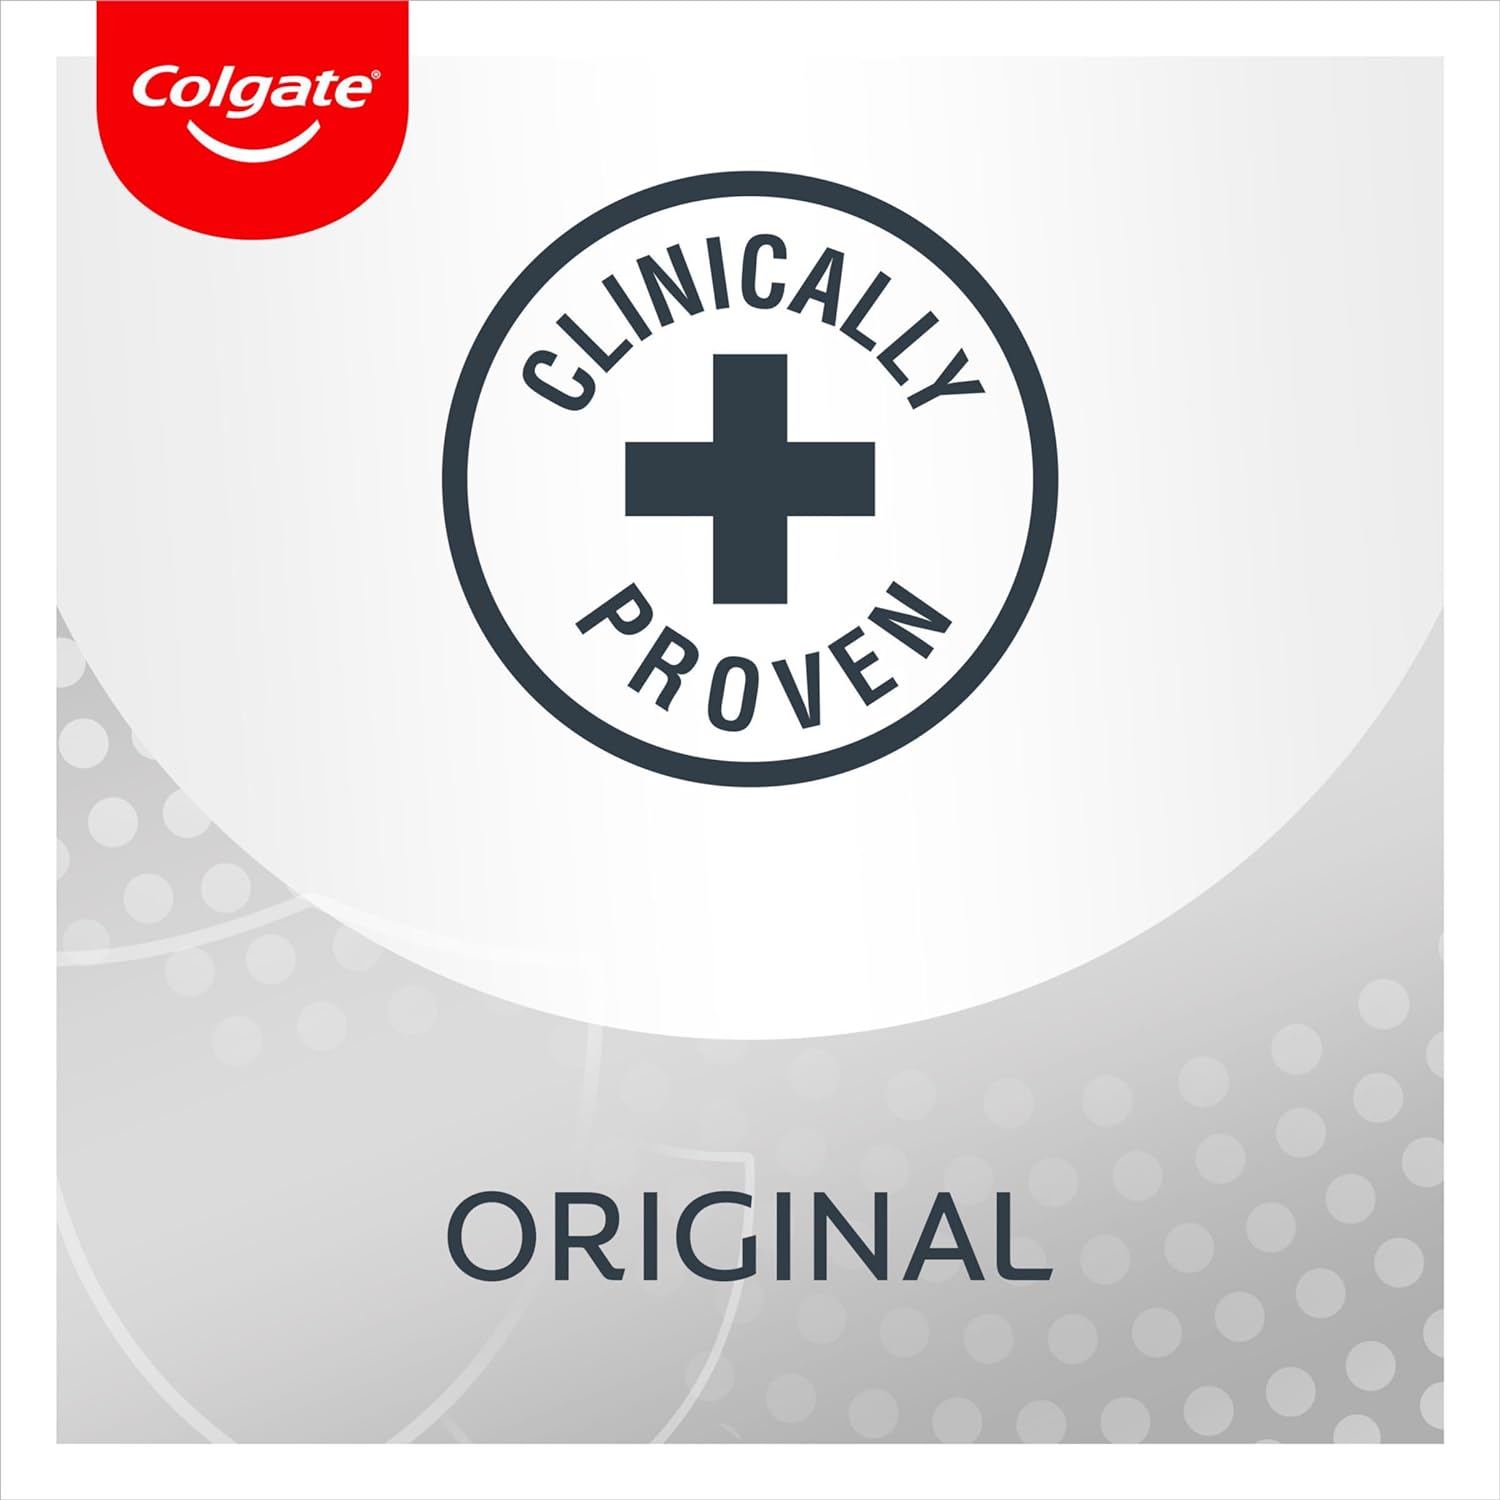 Colgate Total Original Toothpaste (4 x 100 ml), 24 Hour Antibacterial, Complete Protection for Your Whole Mouth, Protects Against Cavities, Contains Fluoride, Strengthens Enamel